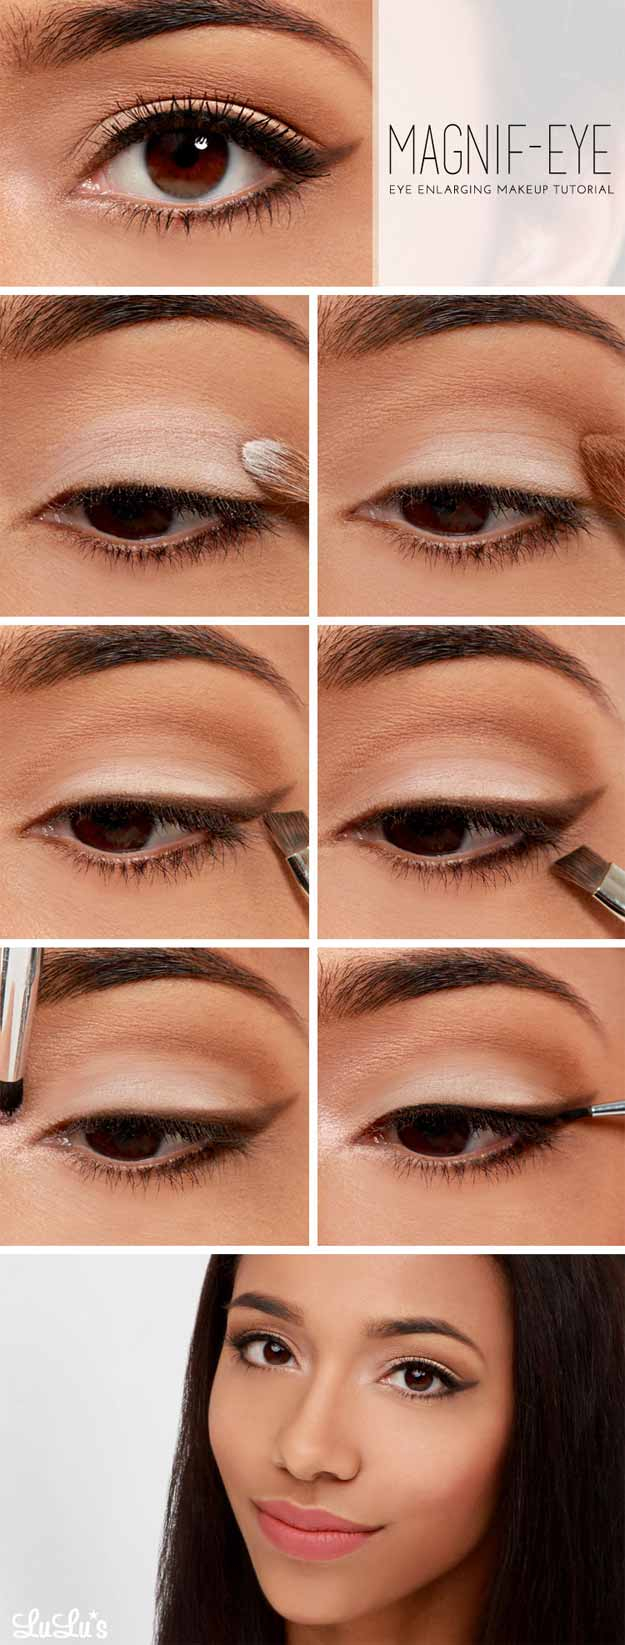 Makeup Looks For Brown Eyes 30 Wedding Makeup For Brown Eyes The Goddess